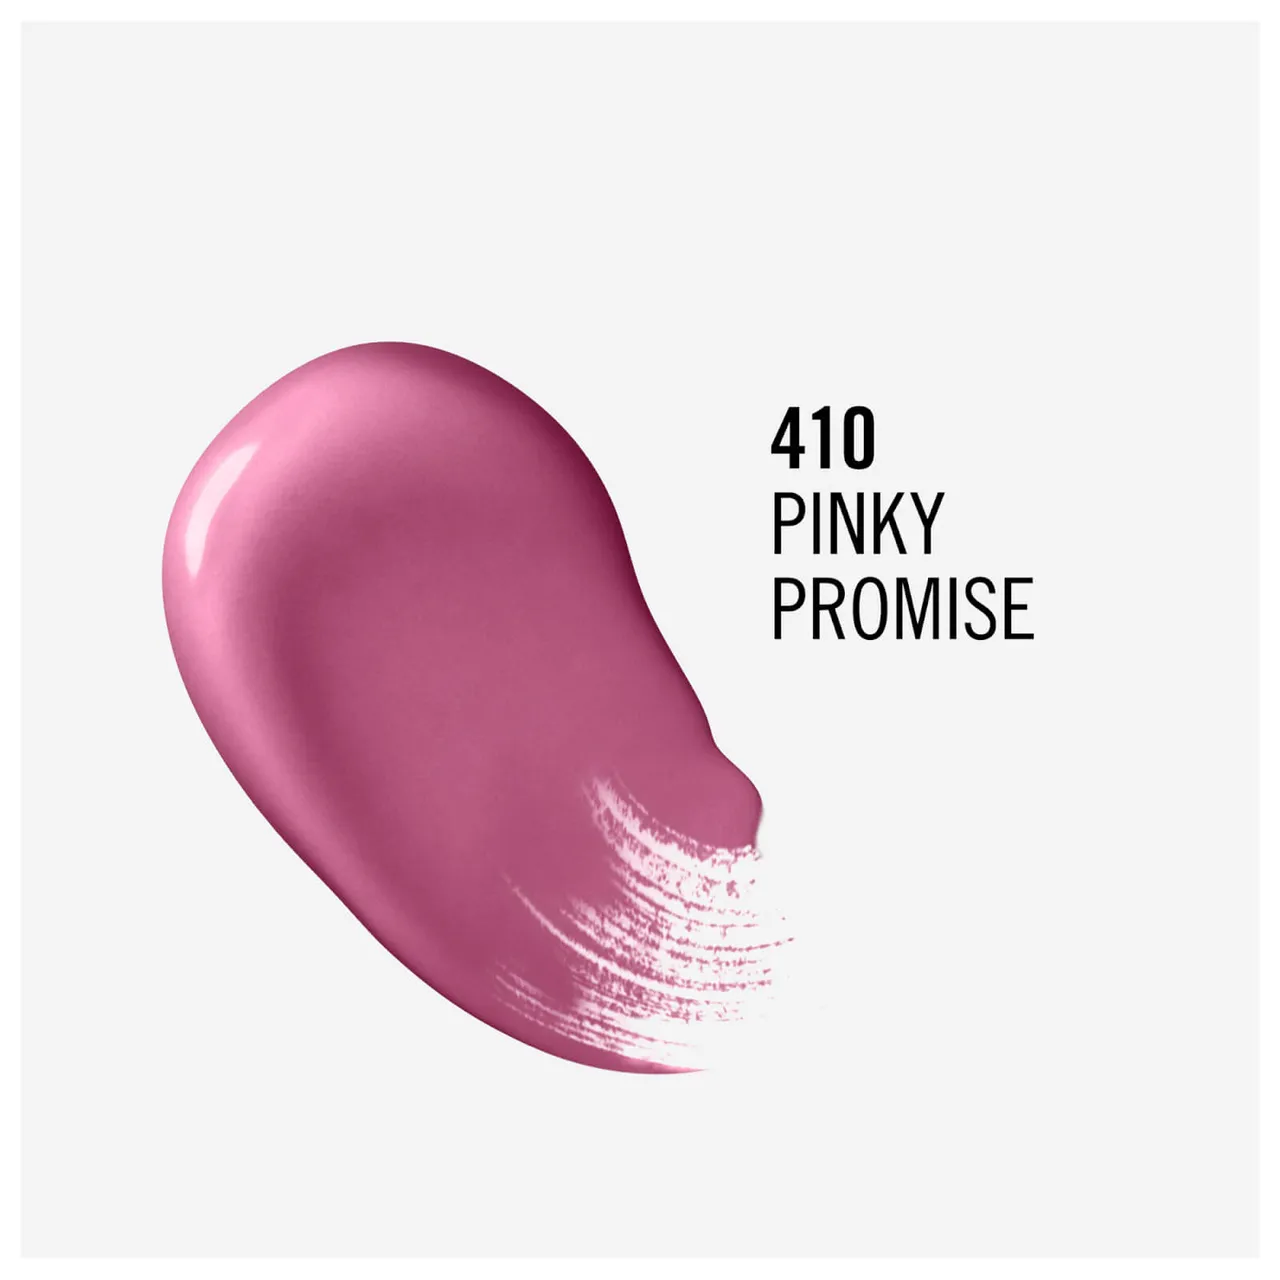 Rimmel Lasting Finish Provocalips 2ml (Various Shades) - 410 Pinky Promise